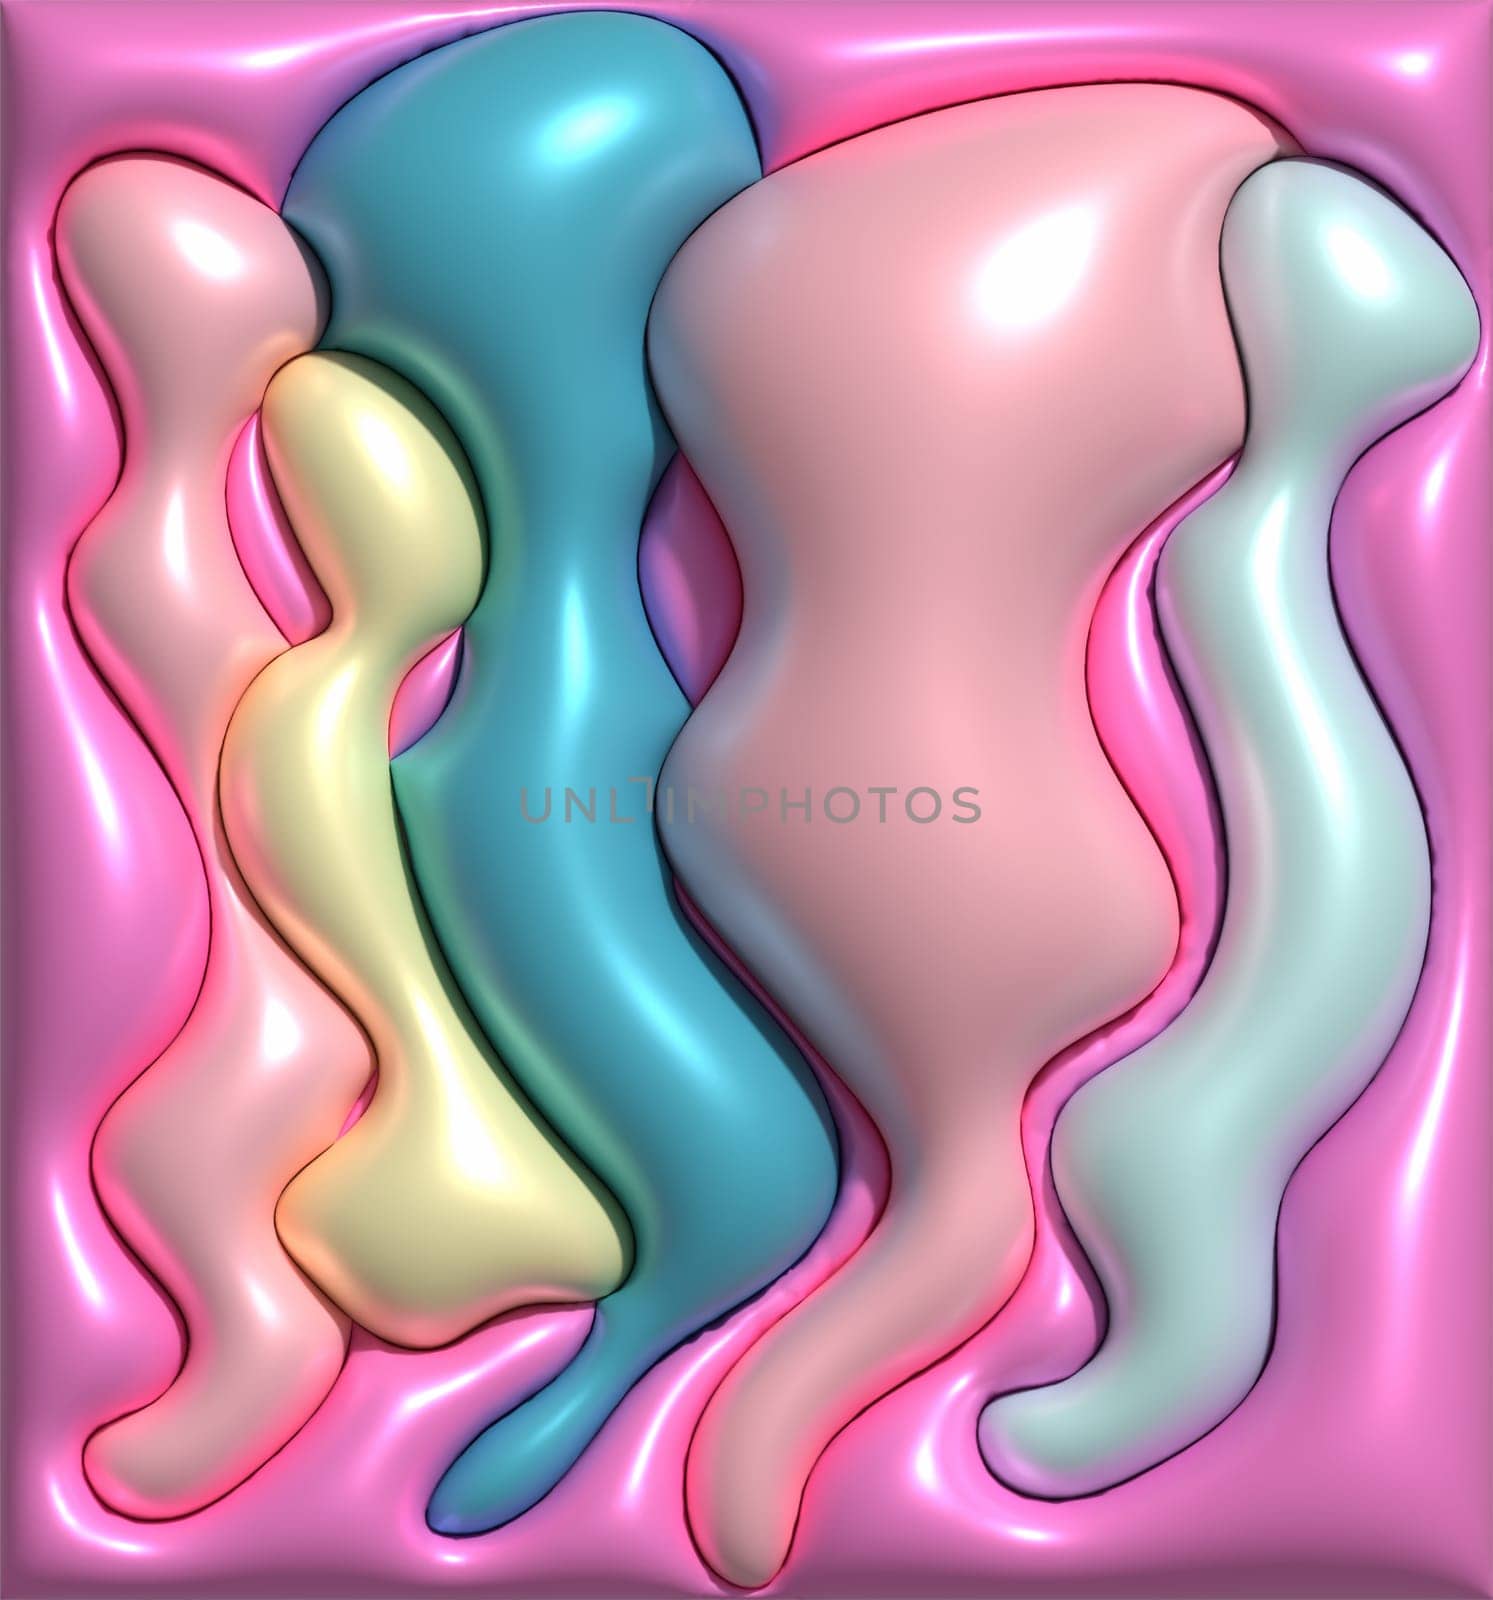 Abstract pink background with wavy shapes, 3D rendering illustration